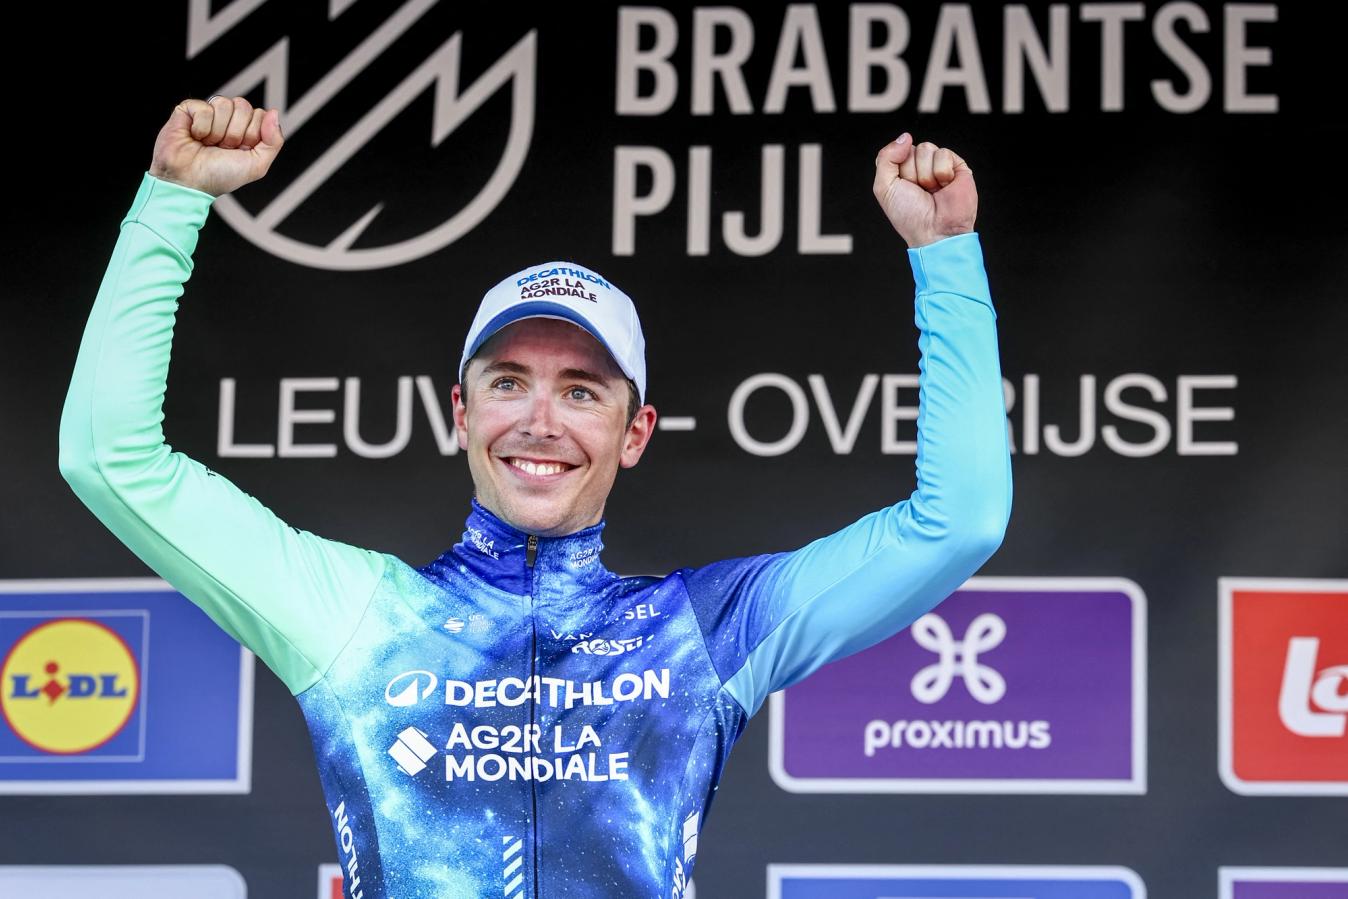 Benoît Cosnefroy heads into the Ardennes Classics with a recent victory to his name